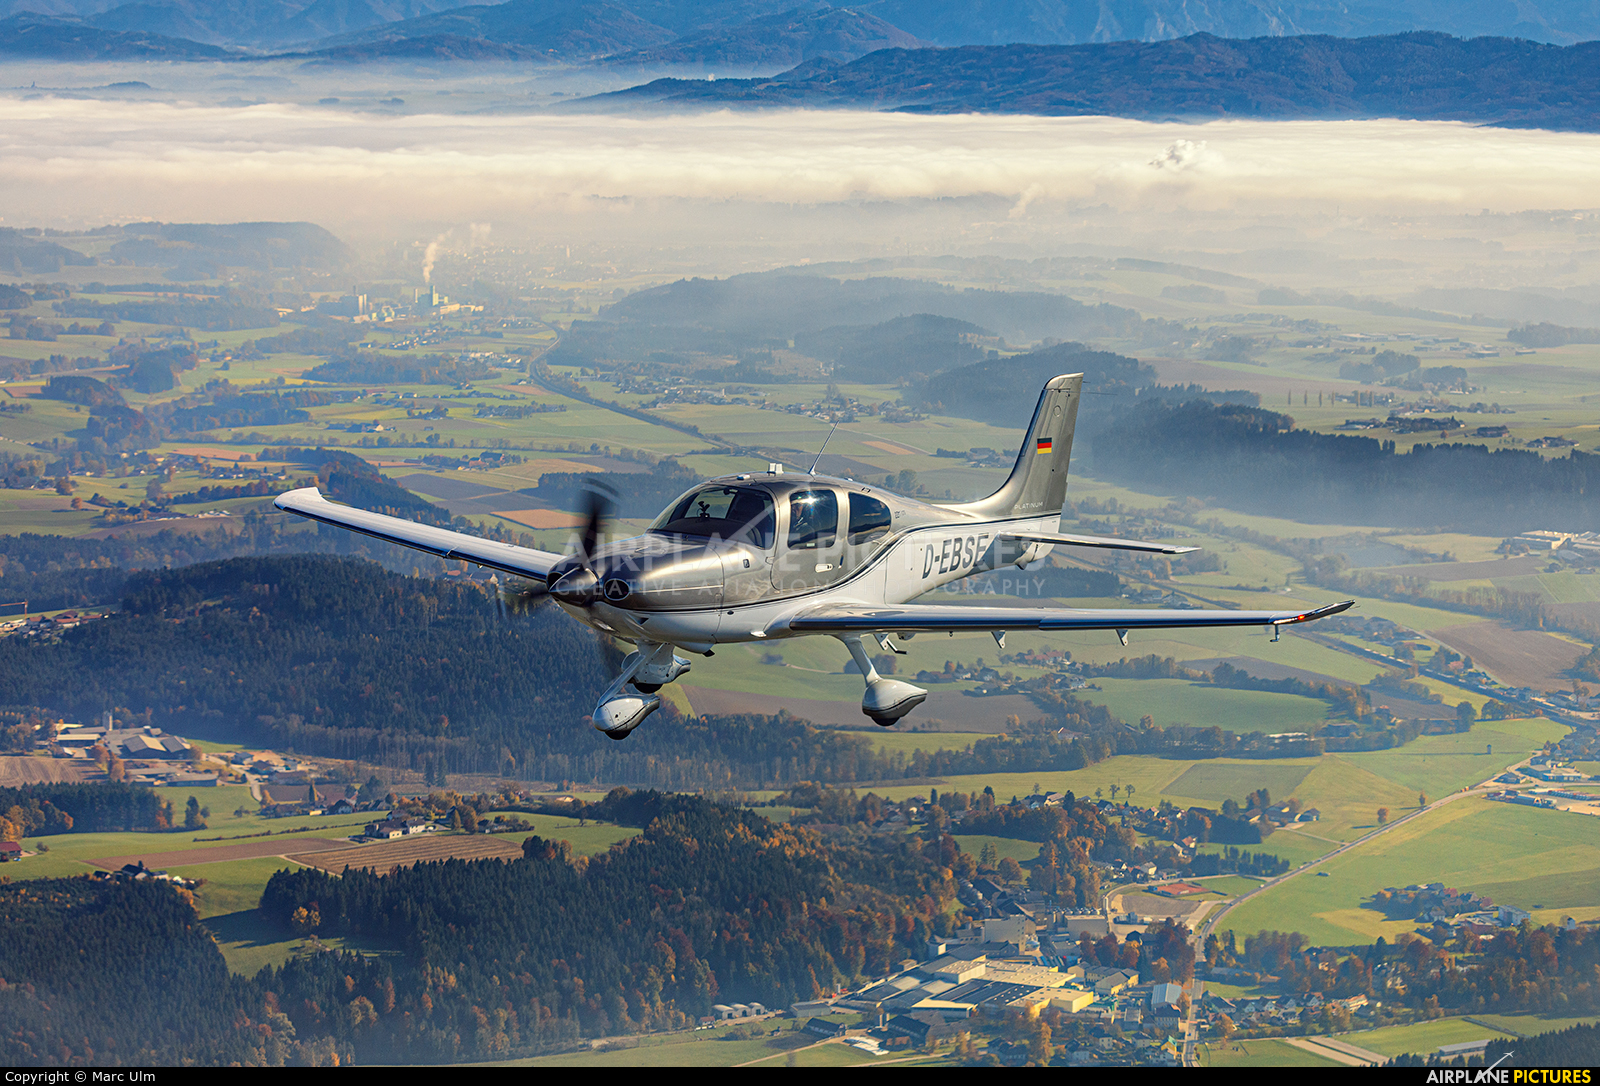 Private D-EBSE aircraft at In Flight - Germany